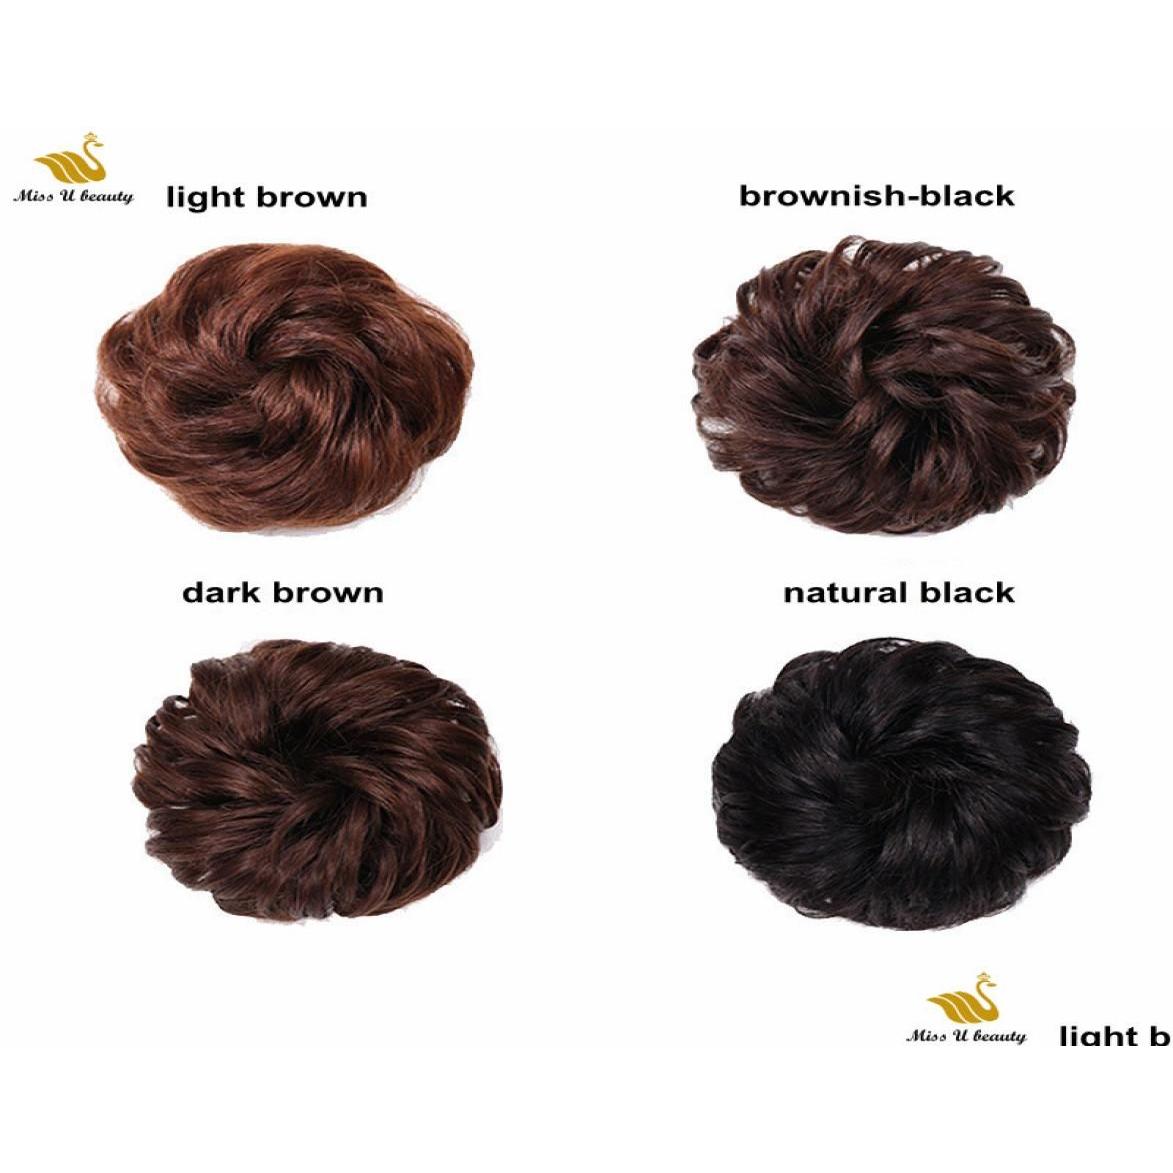 Chignons 100 Real Humanhair Scrunchie elastic Band Extensions Bun Hair Topknot Black Brown Curly Chignons4786512 Delivery Delivery P DHB2Q